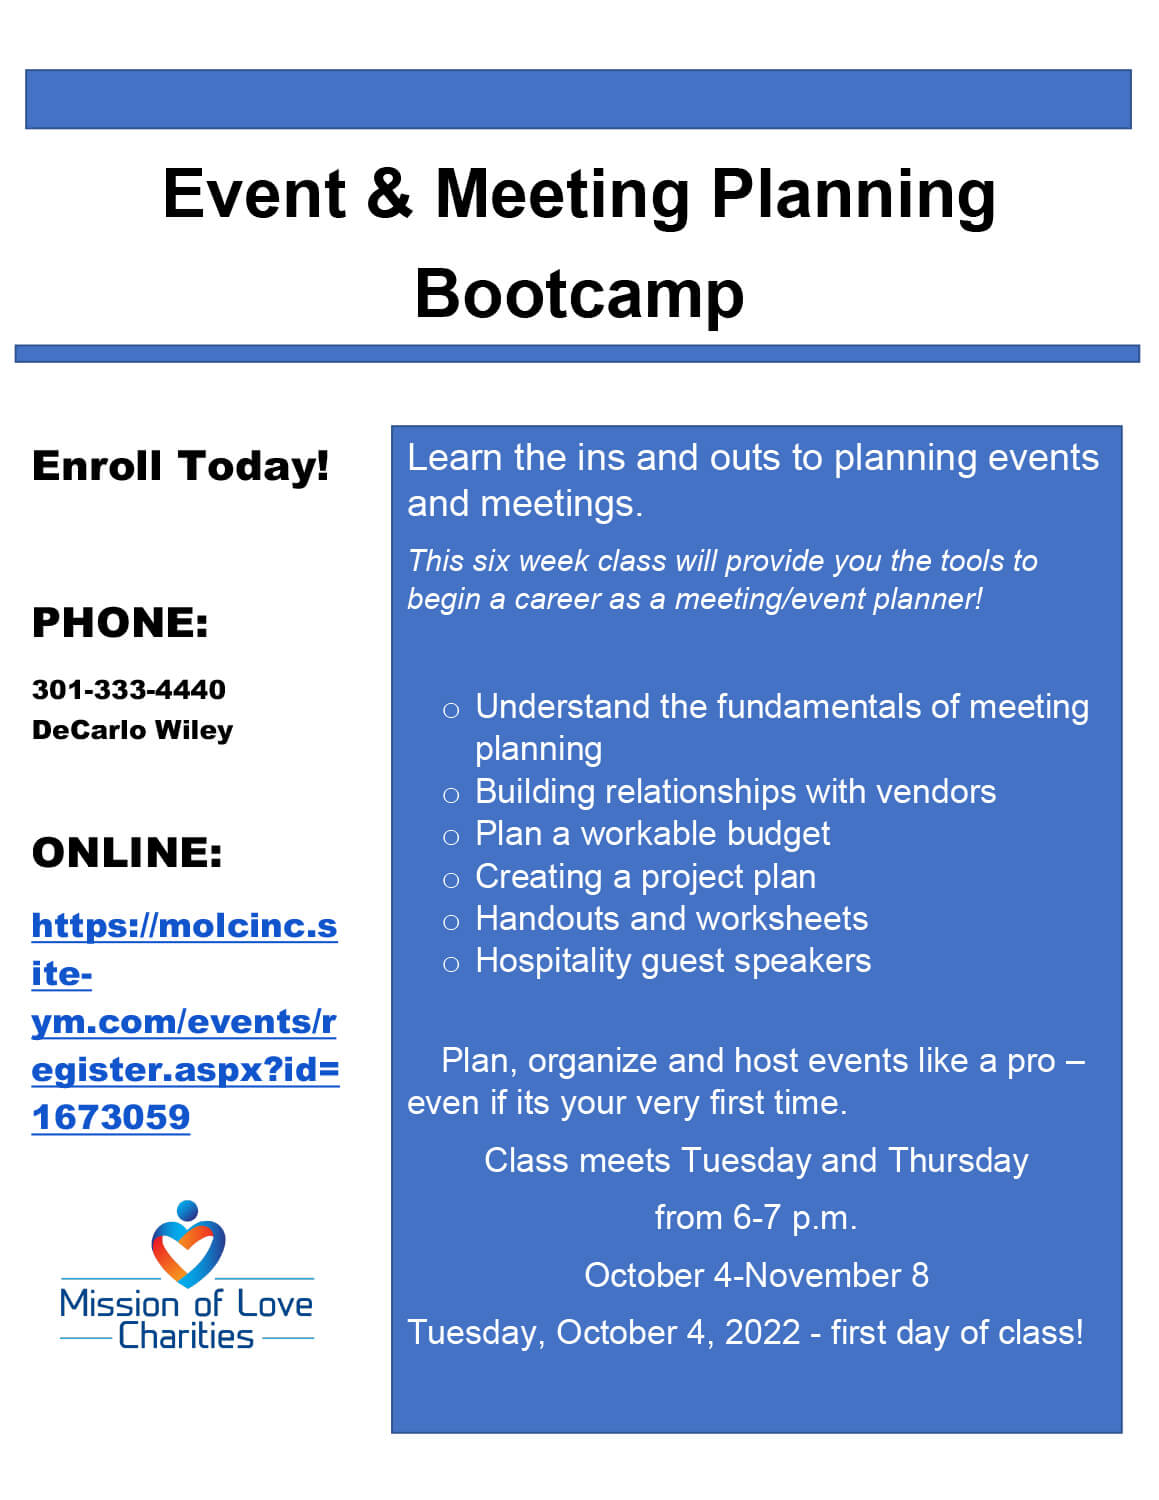 Event & Meeting Planning Bootcamp